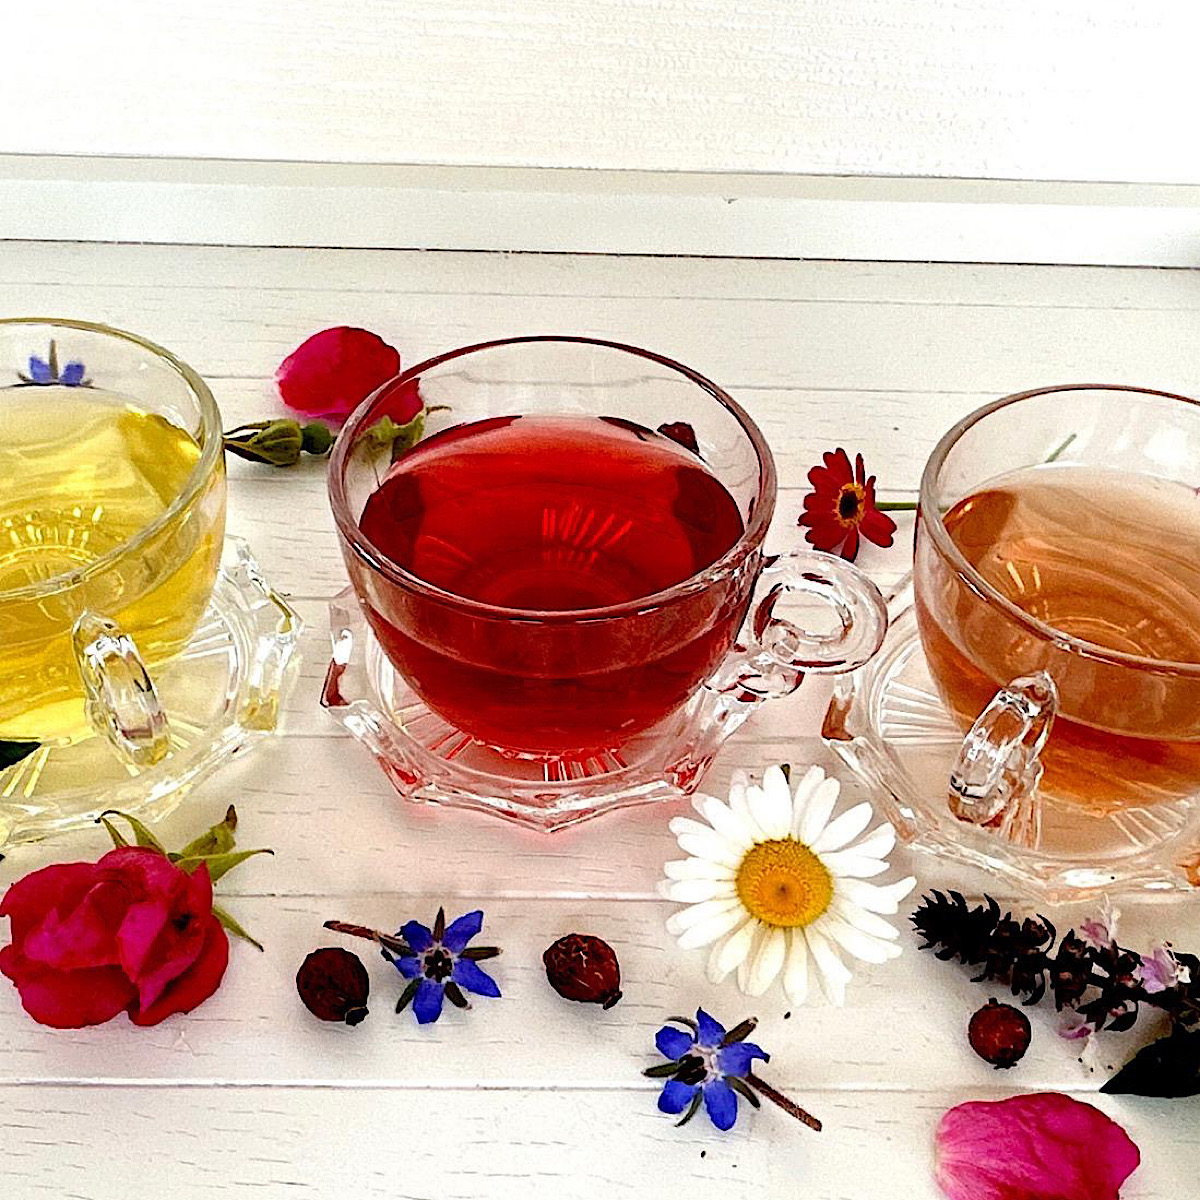 3 cups of herbal tea with flowers scattered in front.